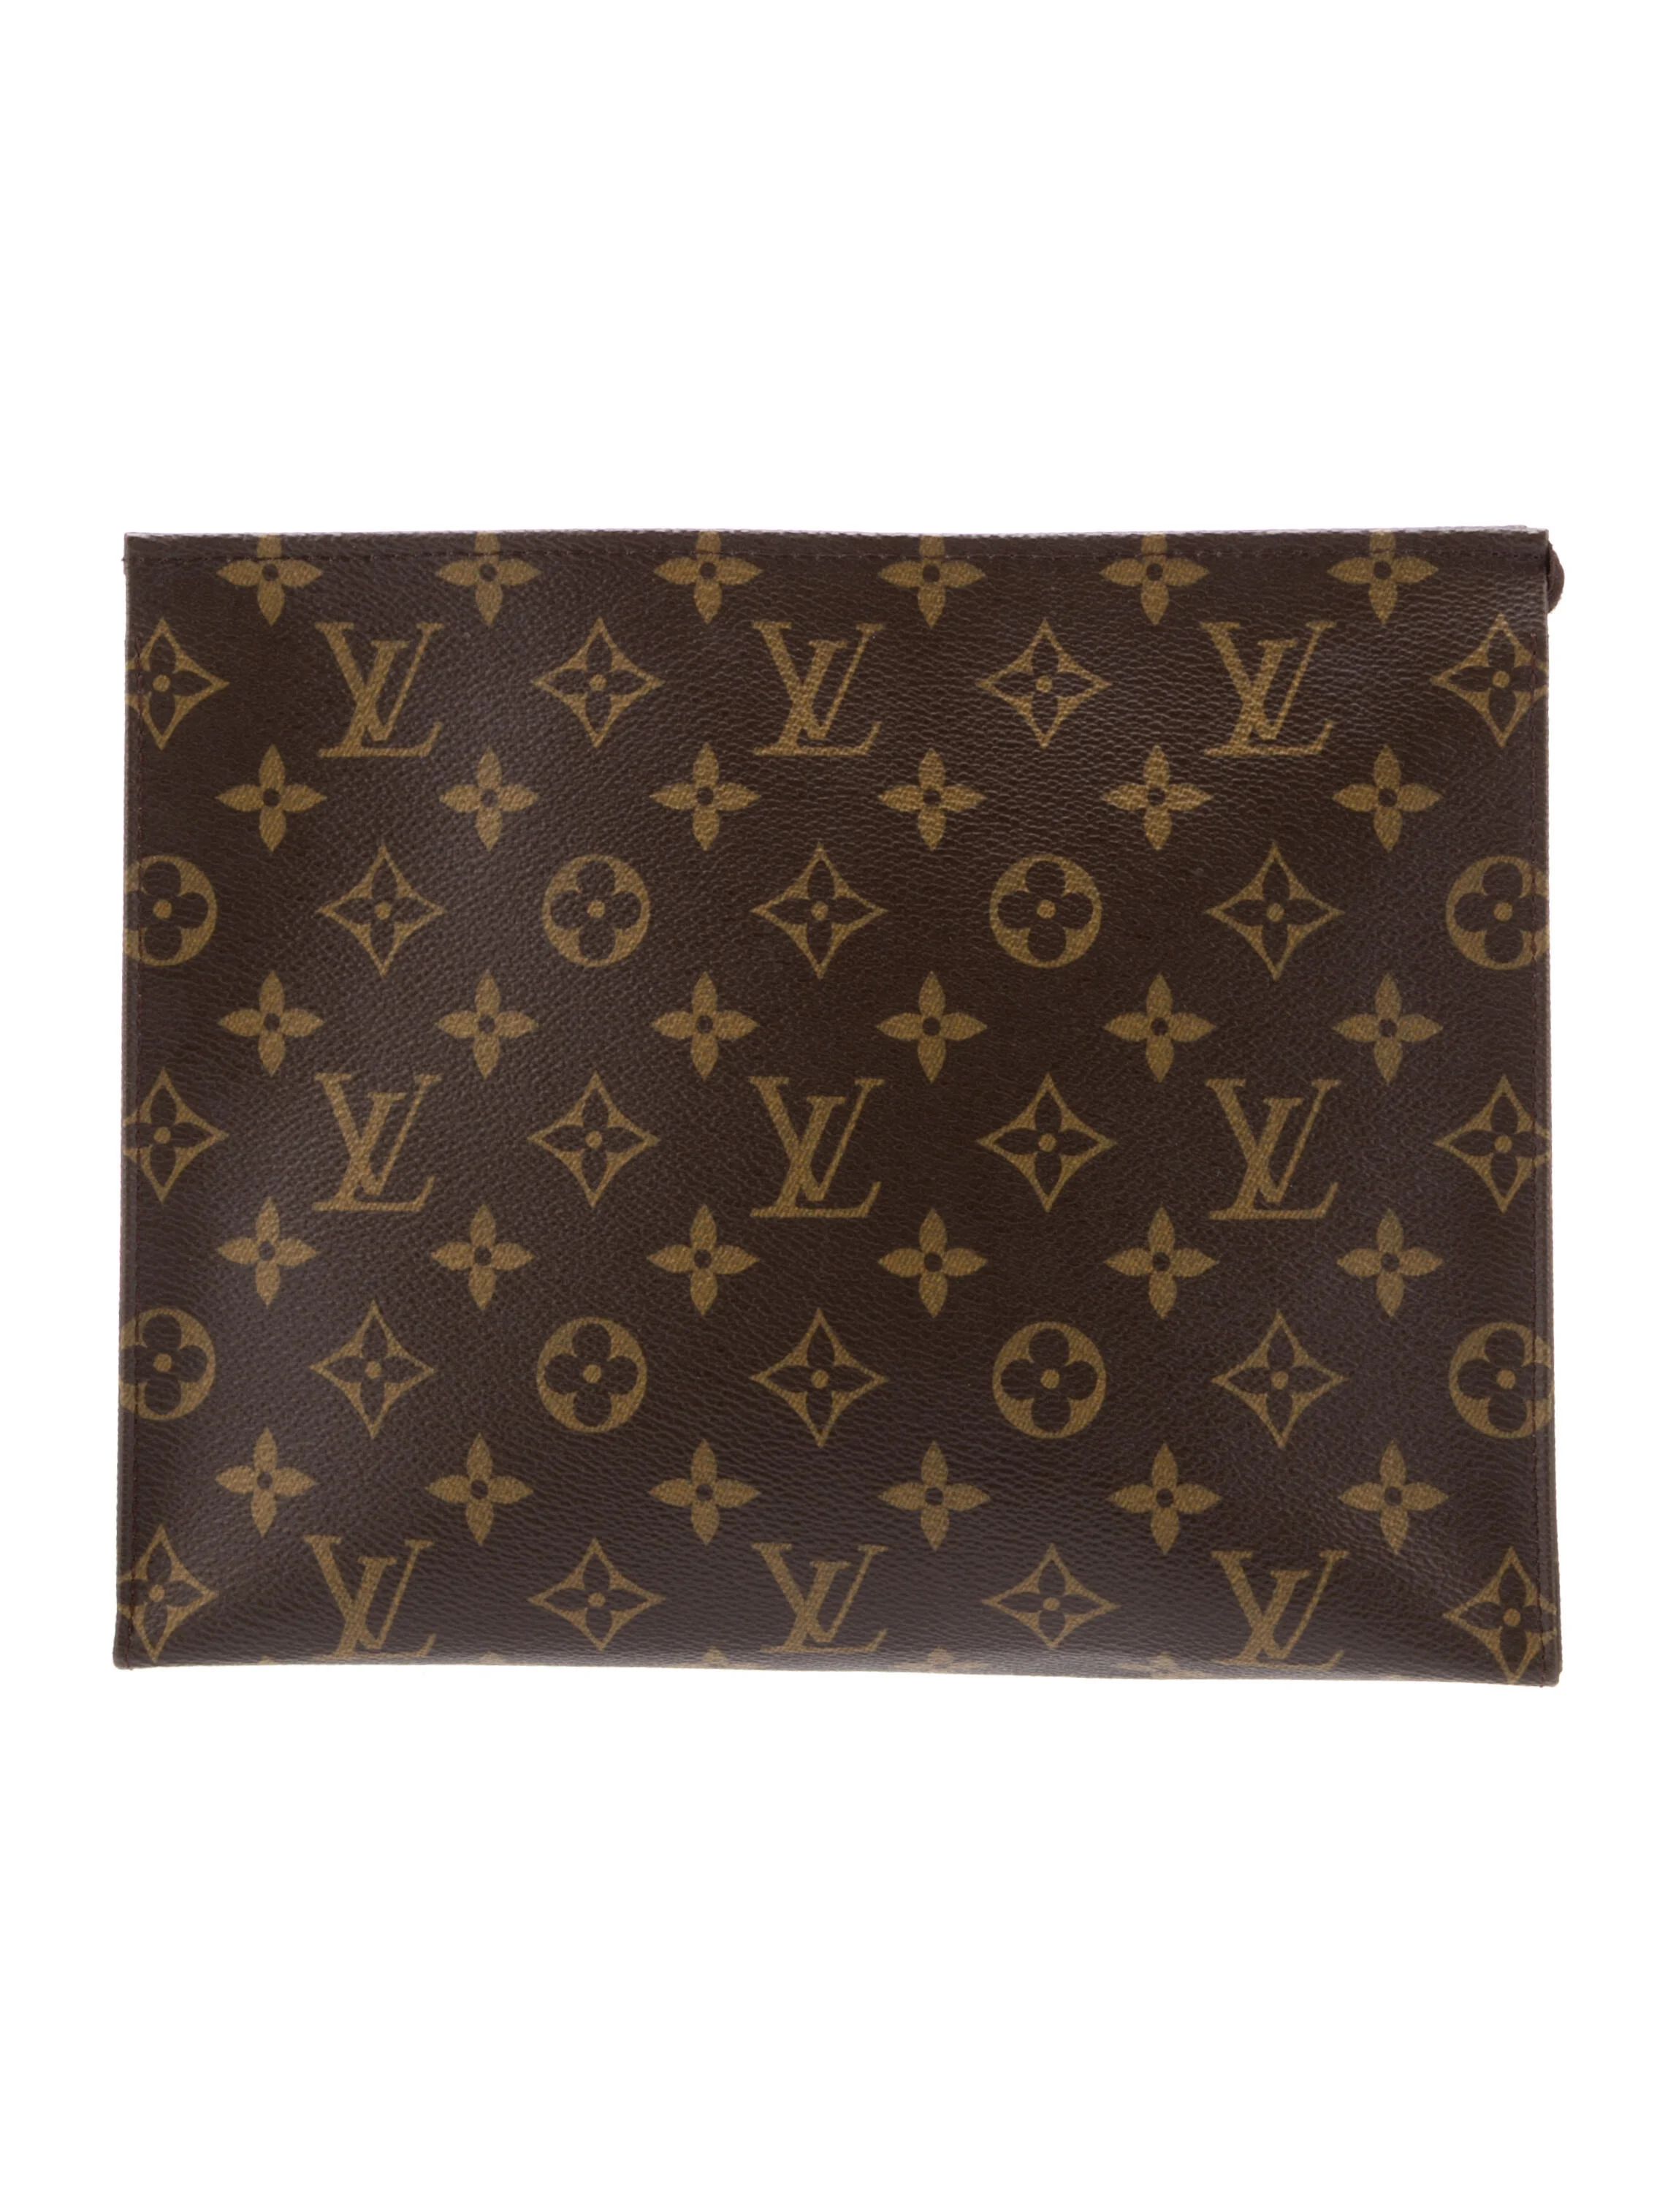 Monogram Toiletry Pouch 26 | The RealReal